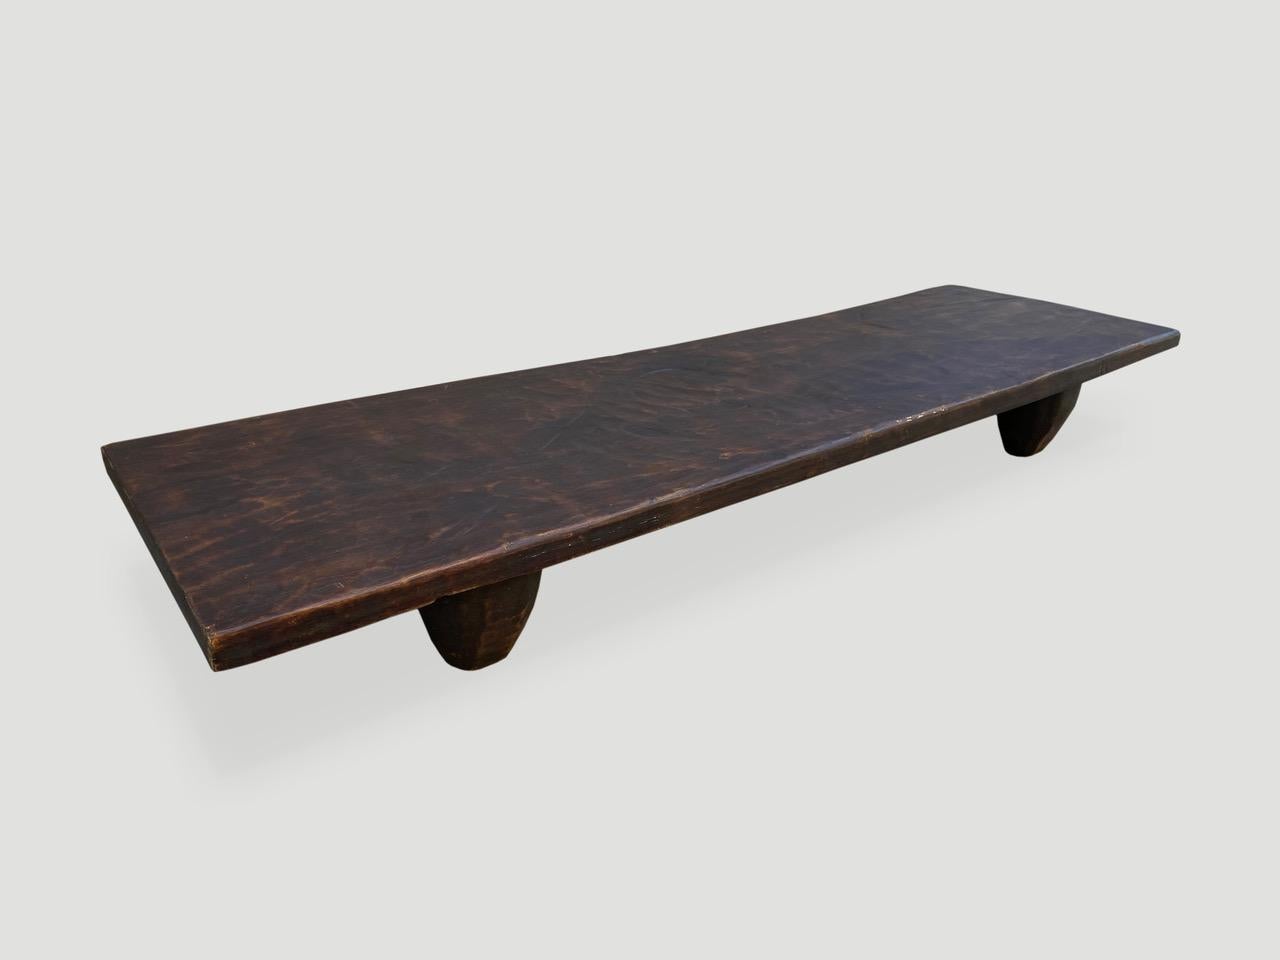 Antique coffee table or bench hand carved from a single block of wood, native to the west coast of Africa. This one is unusually long and shown with low minimalist legs. We only source the best. 

This bench or coffee table was sourced in the